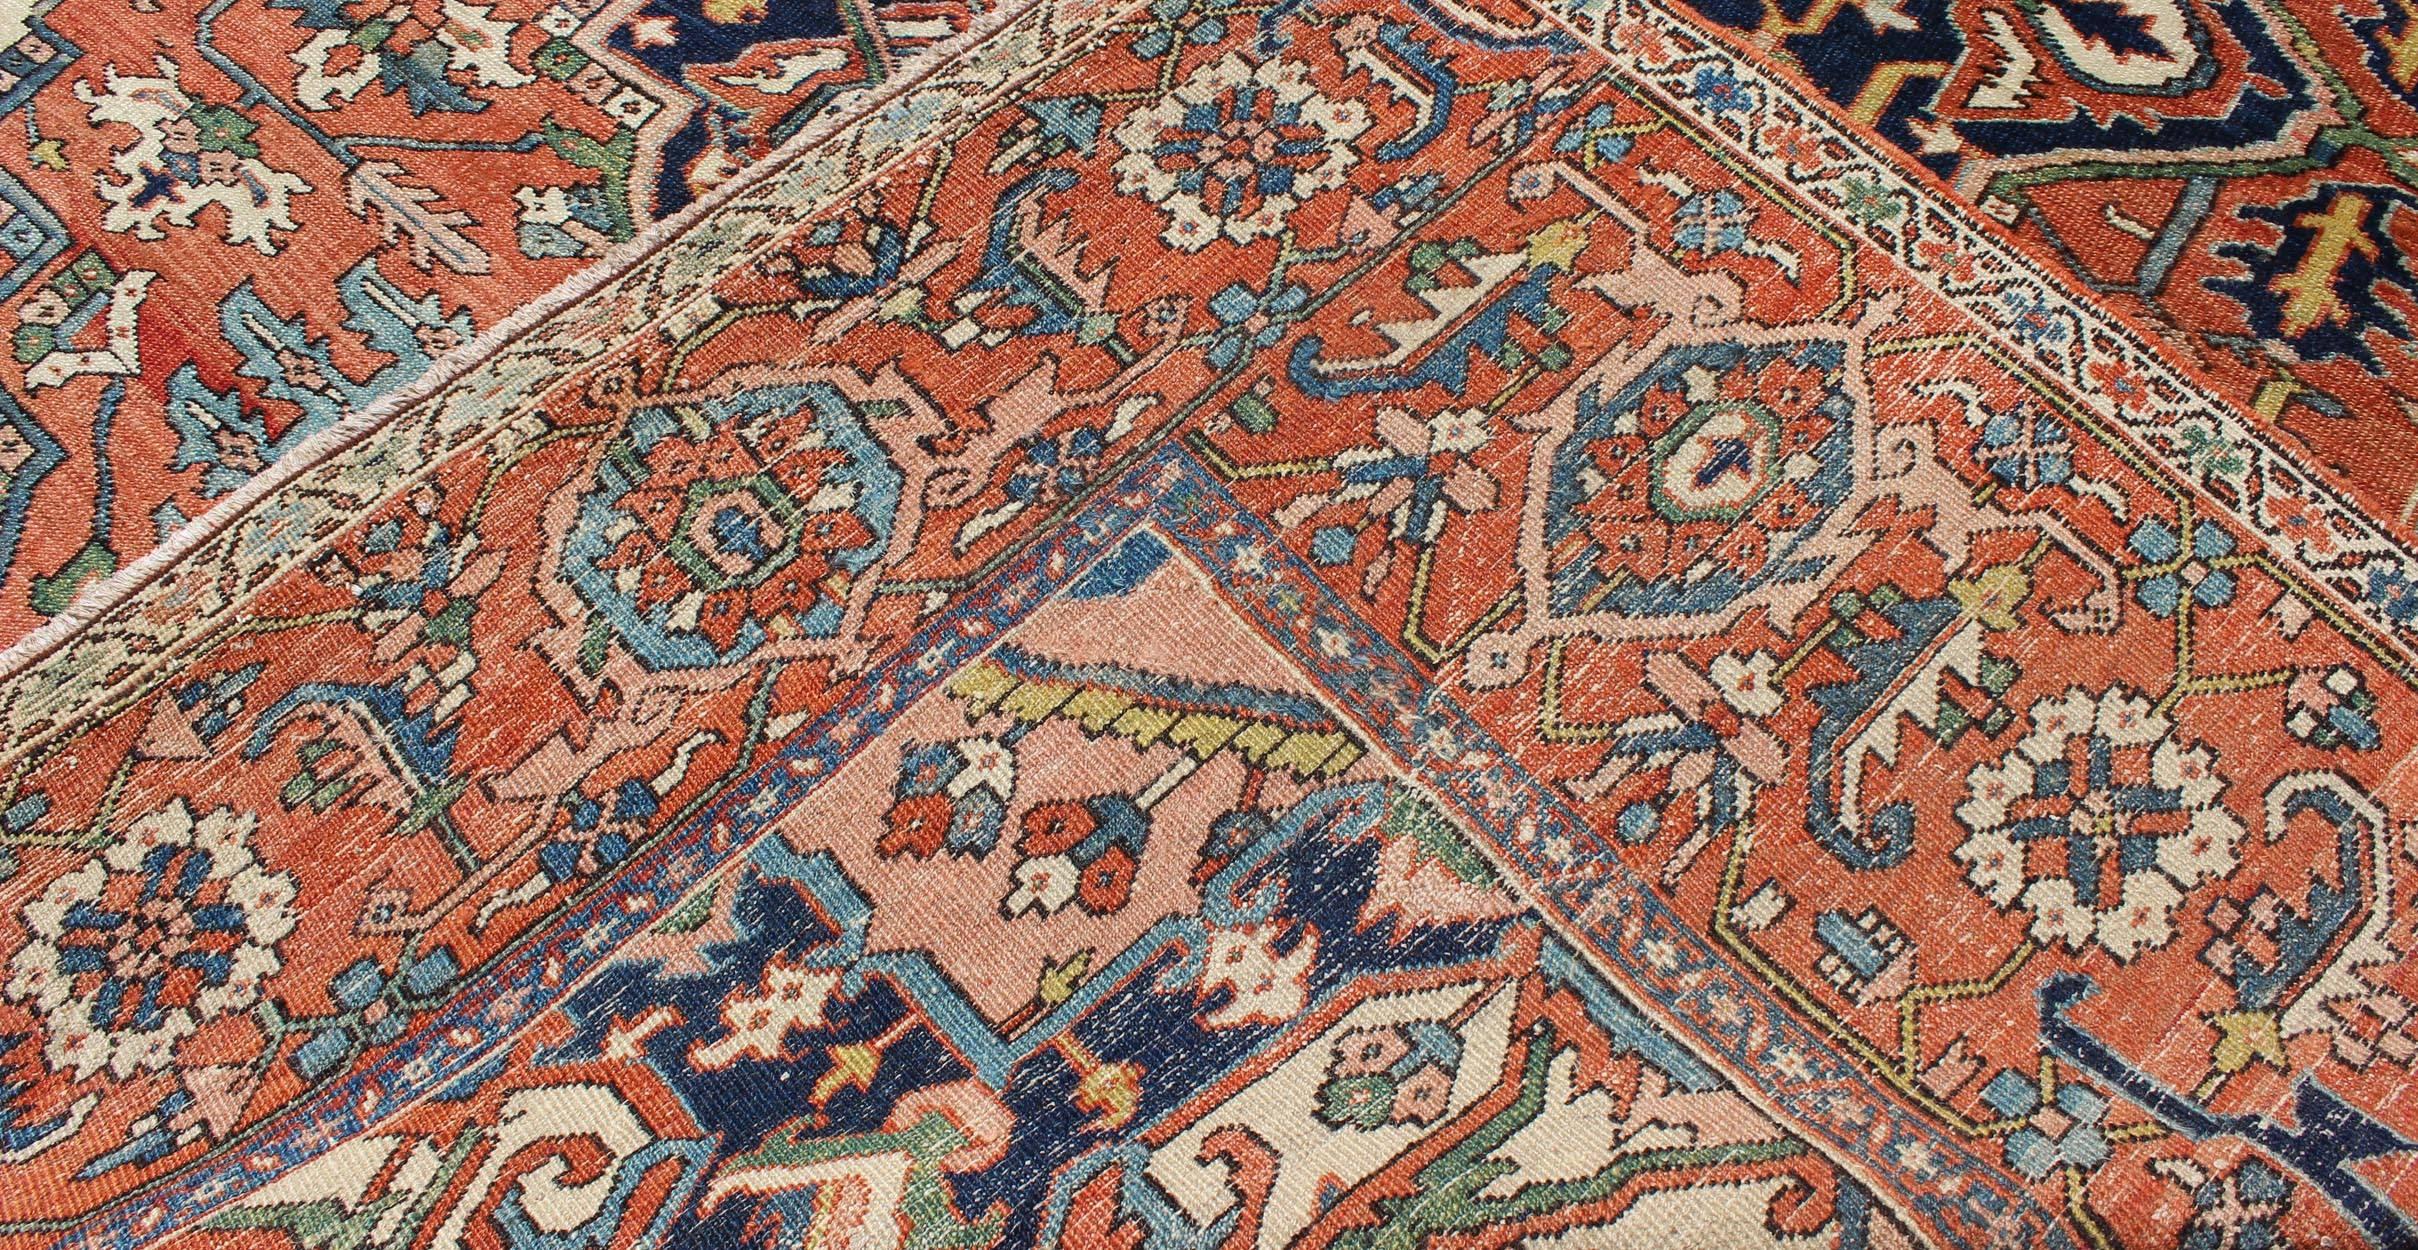 Early 20th Century Antique Persian Serapi Rug with Bold Medallion in Orange, Navy Blue and Green